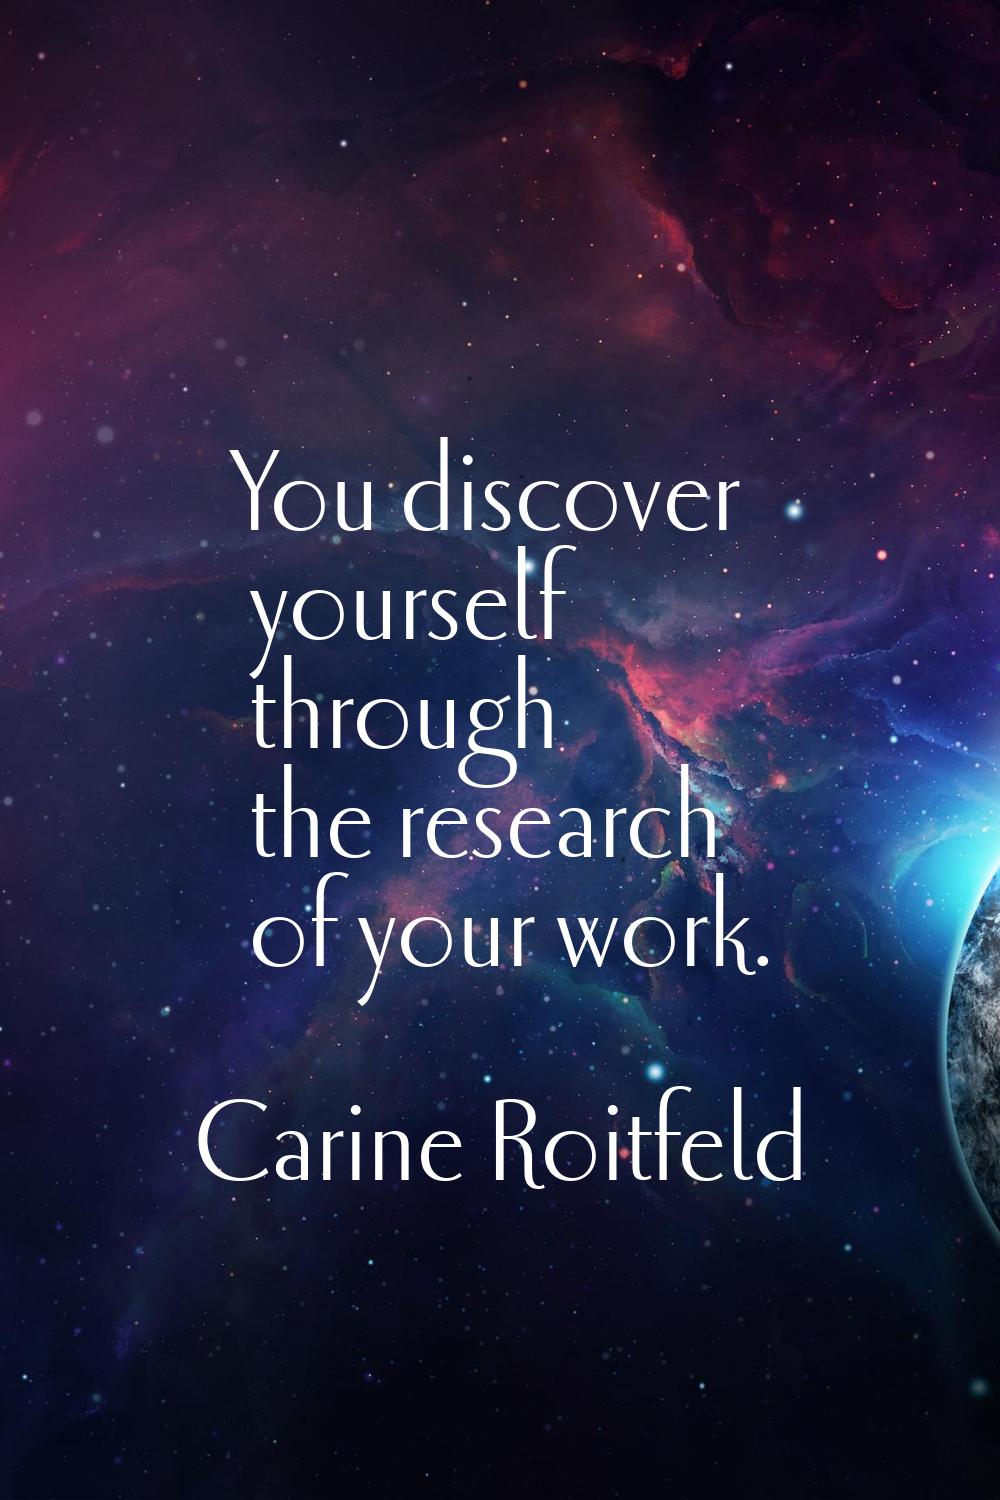 You discover yourself through the research of your work.